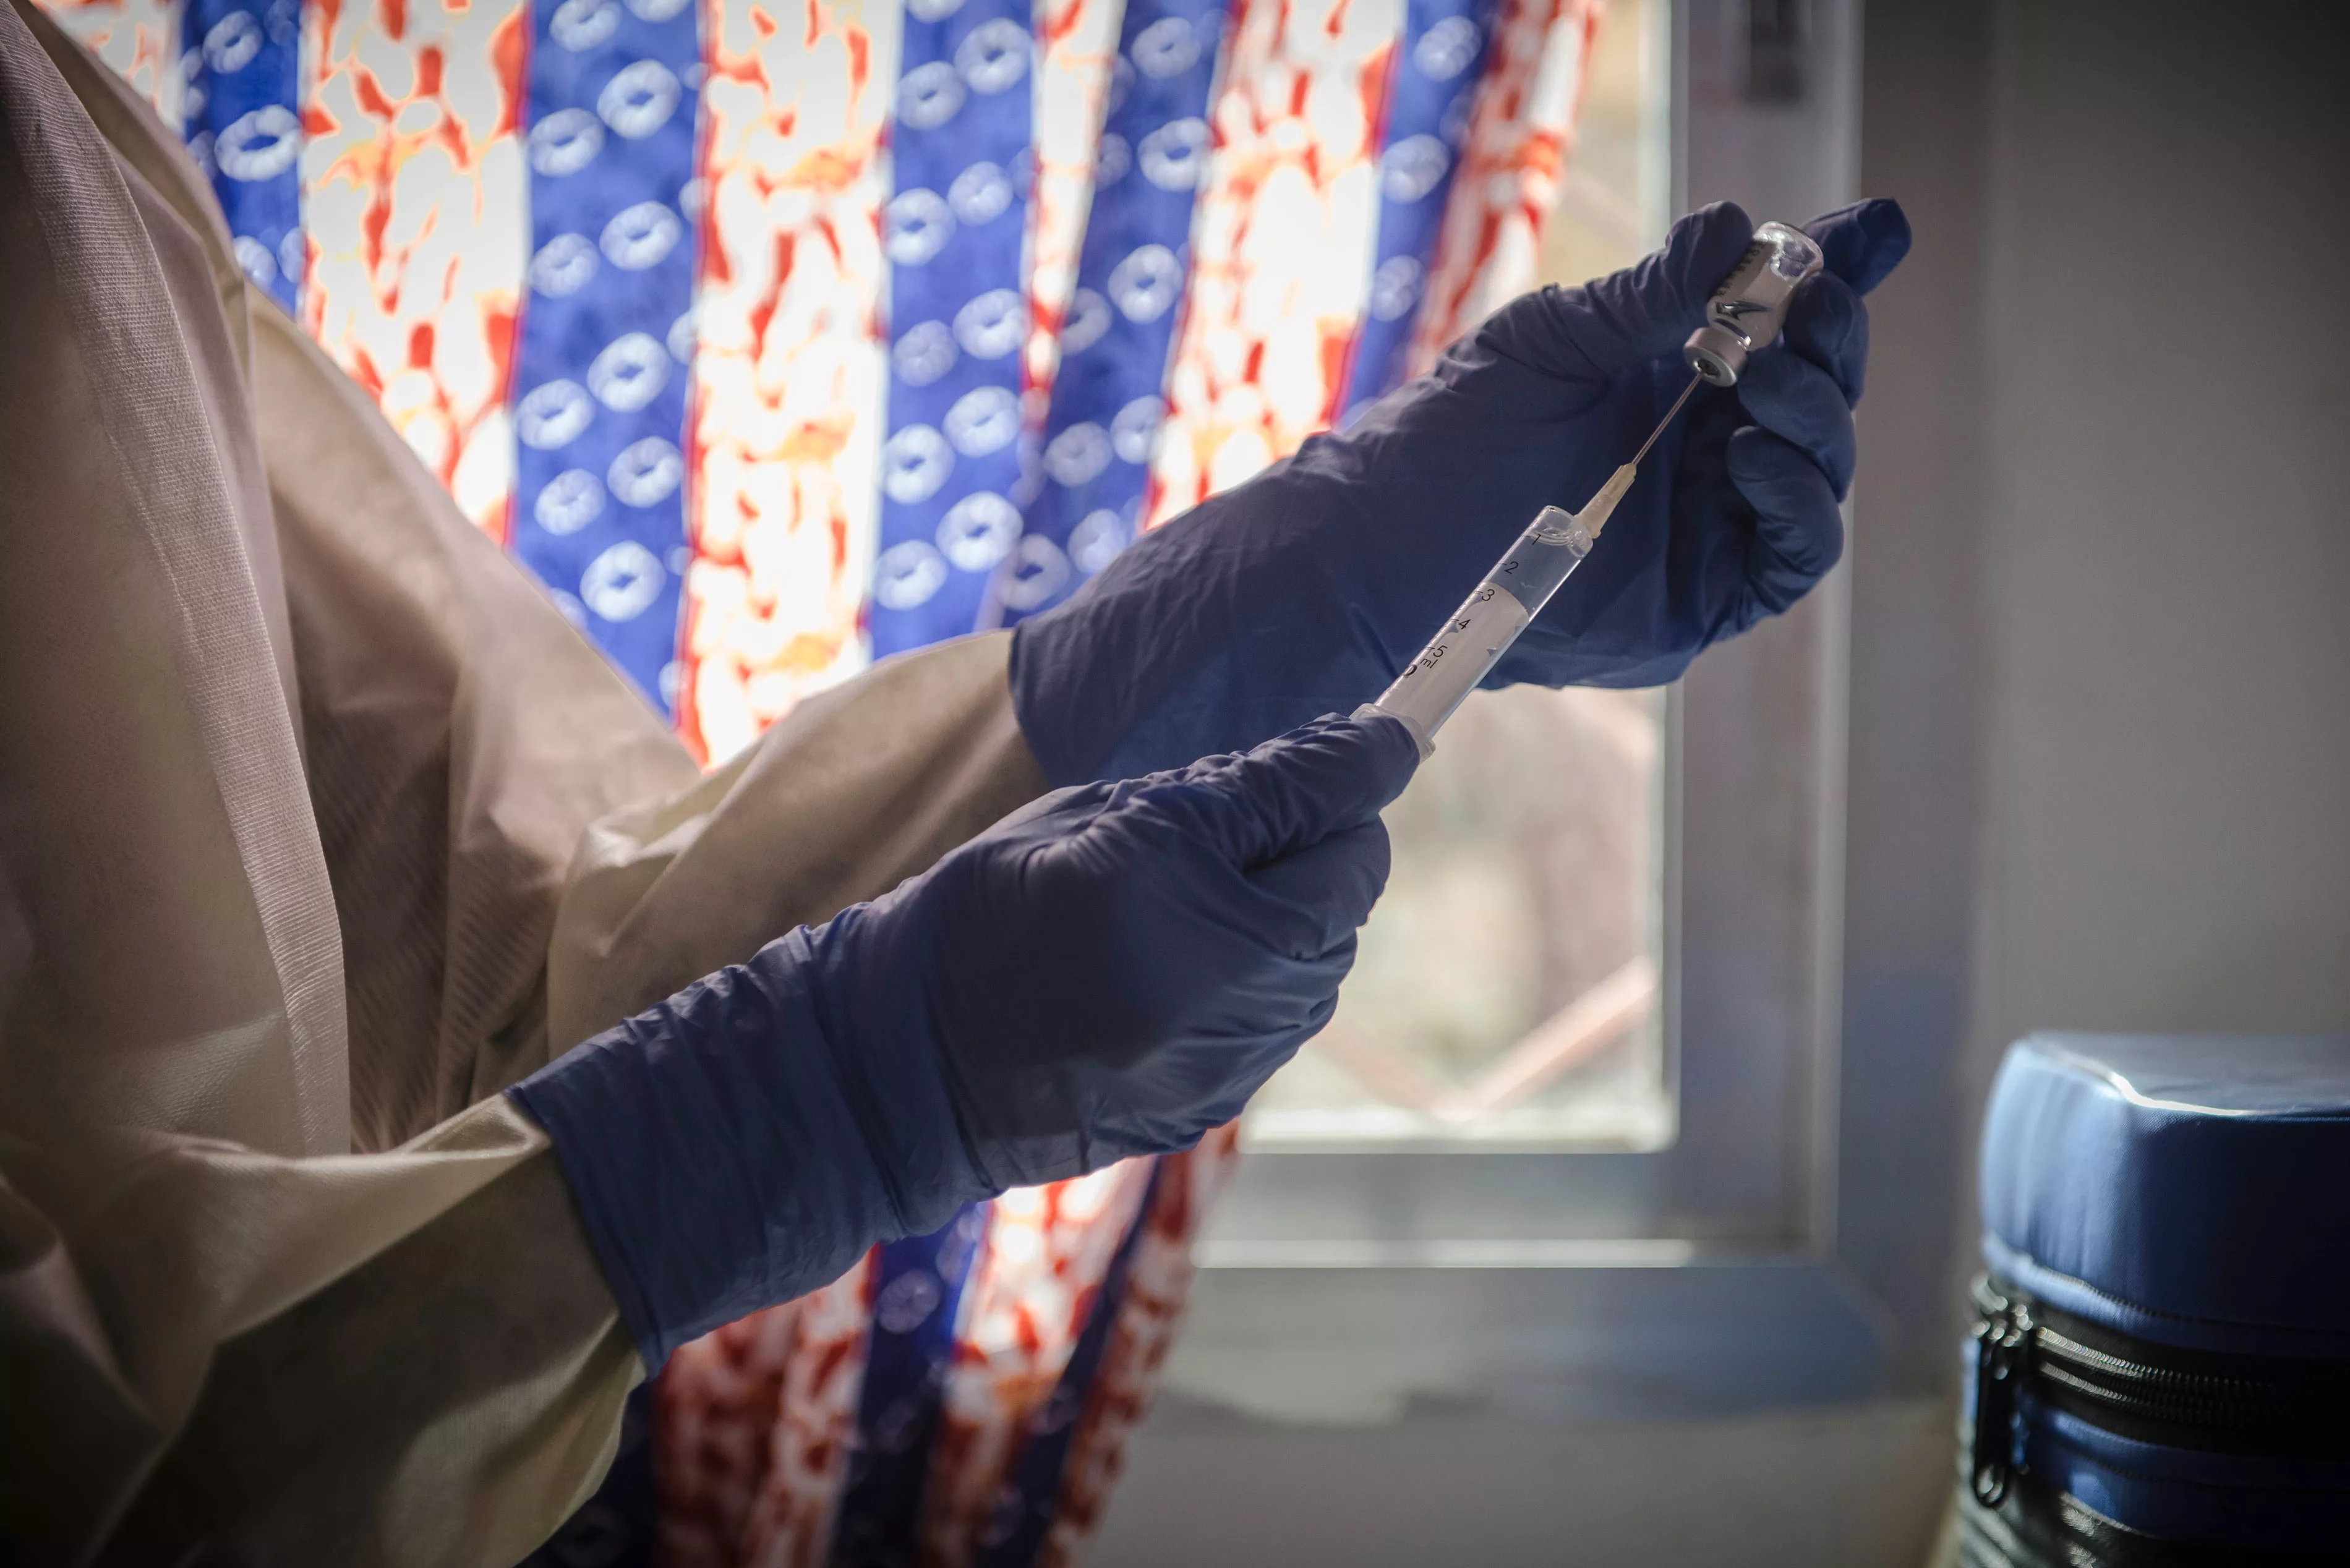 MSF staff prepares a dose of an experimental vaccine